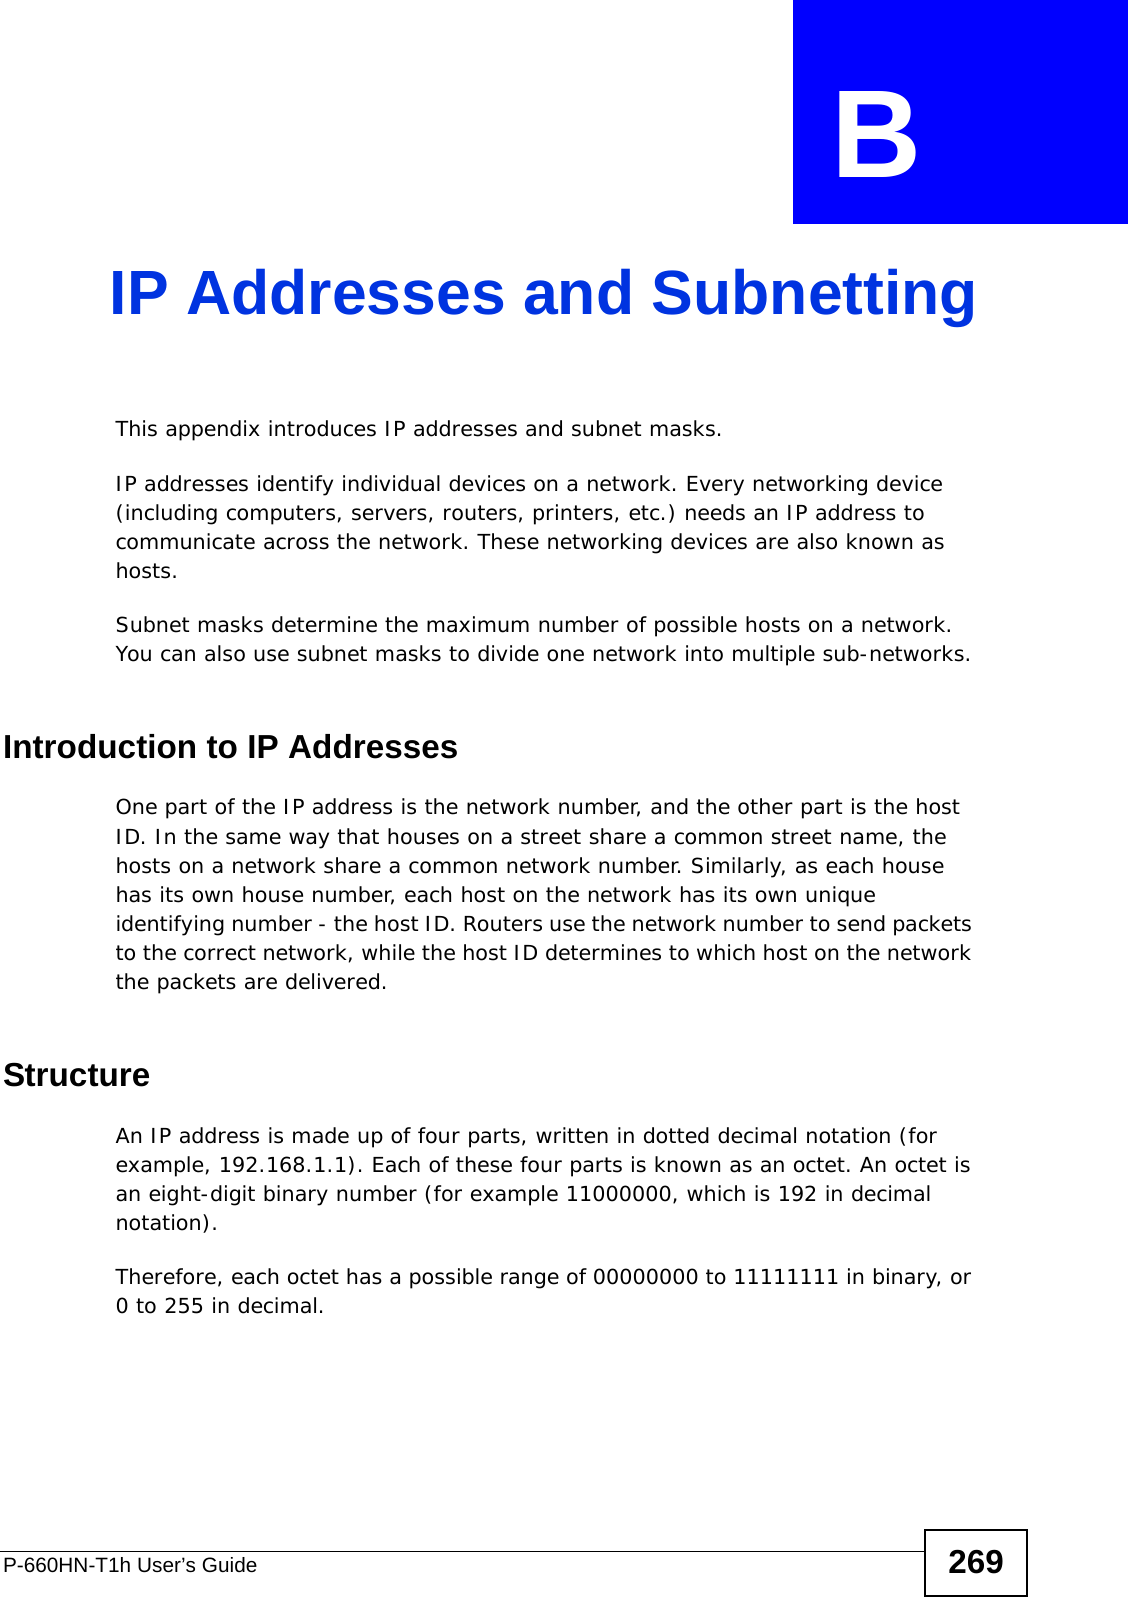 P-660HN-T1h User’s Guide 269APPENDIX  B IP Addresses and SubnettingThis appendix introduces IP addresses and subnet masks. IP addresses identify individual devices on a network. Every networking device (including computers, servers, routers, printers, etc.) needs an IP address to communicate across the network. These networking devices are also known as hosts.Subnet masks determine the maximum number of possible hosts on a network. You can also use subnet masks to divide one network into multiple sub-networks.Introduction to IP AddressesOne part of the IP address is the network number, and the other part is the host ID. In the same way that houses on a street share a common street name, the hosts on a network share a common network number. Similarly, as each house has its own house number, each host on the network has its own unique identifying number - the host ID. Routers use the network number to send packets to the correct network, while the host ID determines to which host on the network the packets are delivered.StructureAn IP address is made up of four parts, written in dotted decimal notation (for example, 192.168.1.1). Each of these four parts is known as an octet. An octet is an eight-digit binary number (for example 11000000, which is 192 in decimal notation). Therefore, each octet has a possible range of 00000000 to 11111111 in binary, or 0 to 255 in decimal.